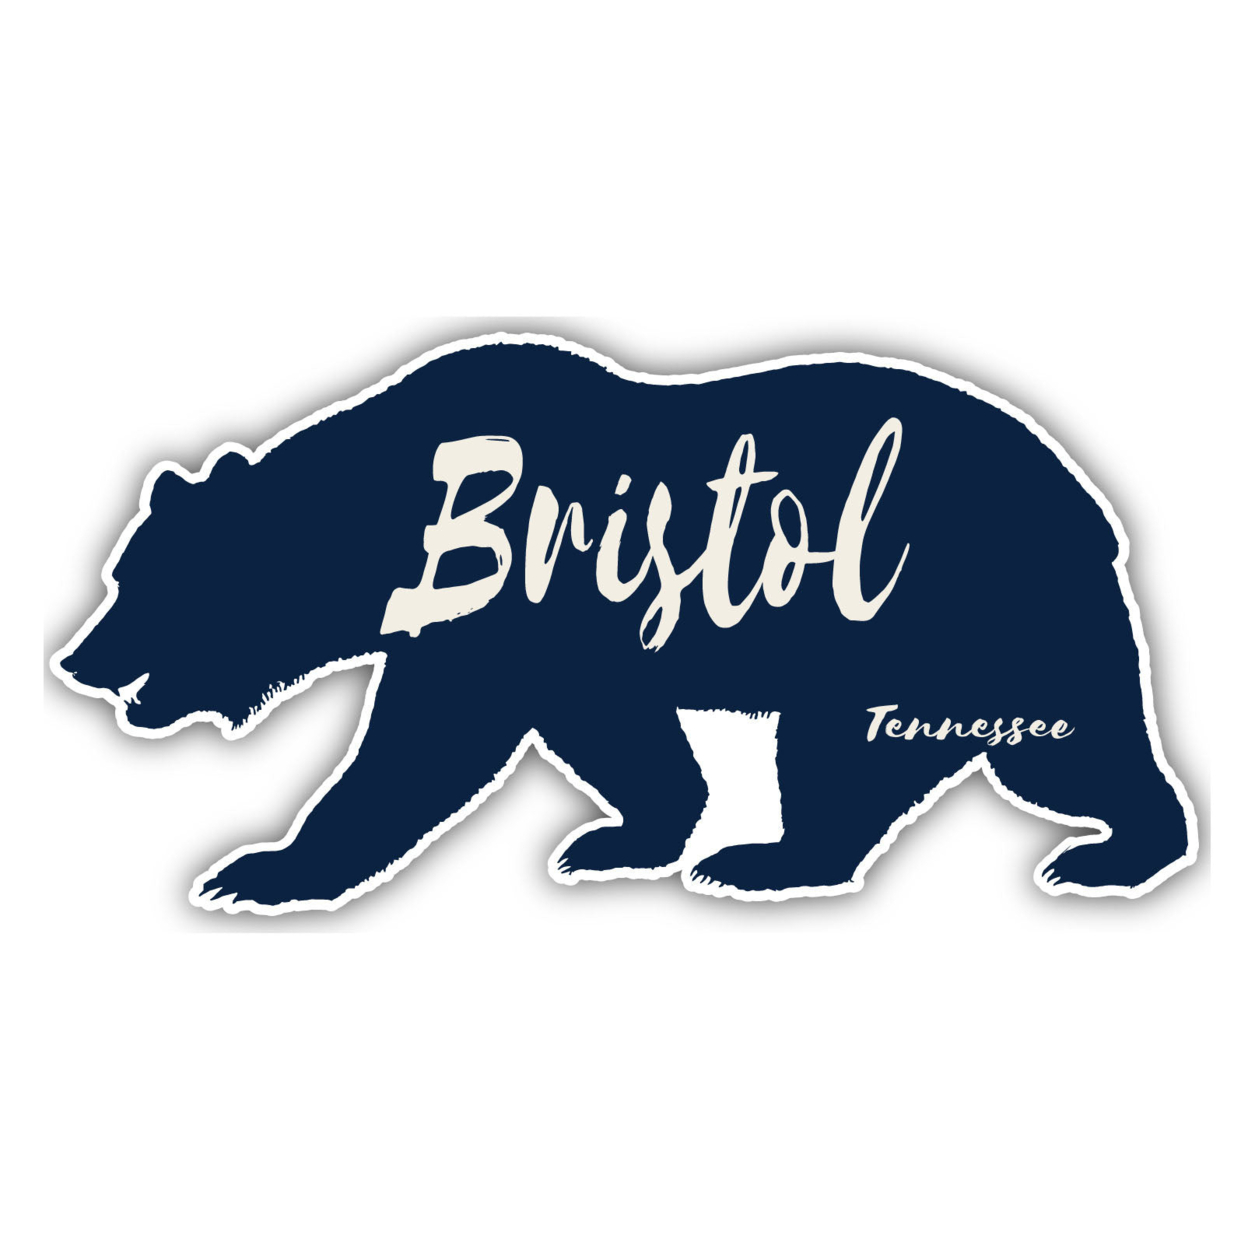 Bristol Tennessee Souvenir Decorative Stickers (Choose Theme And Size) - Single Unit, 4-Inch, Adventures Awaits